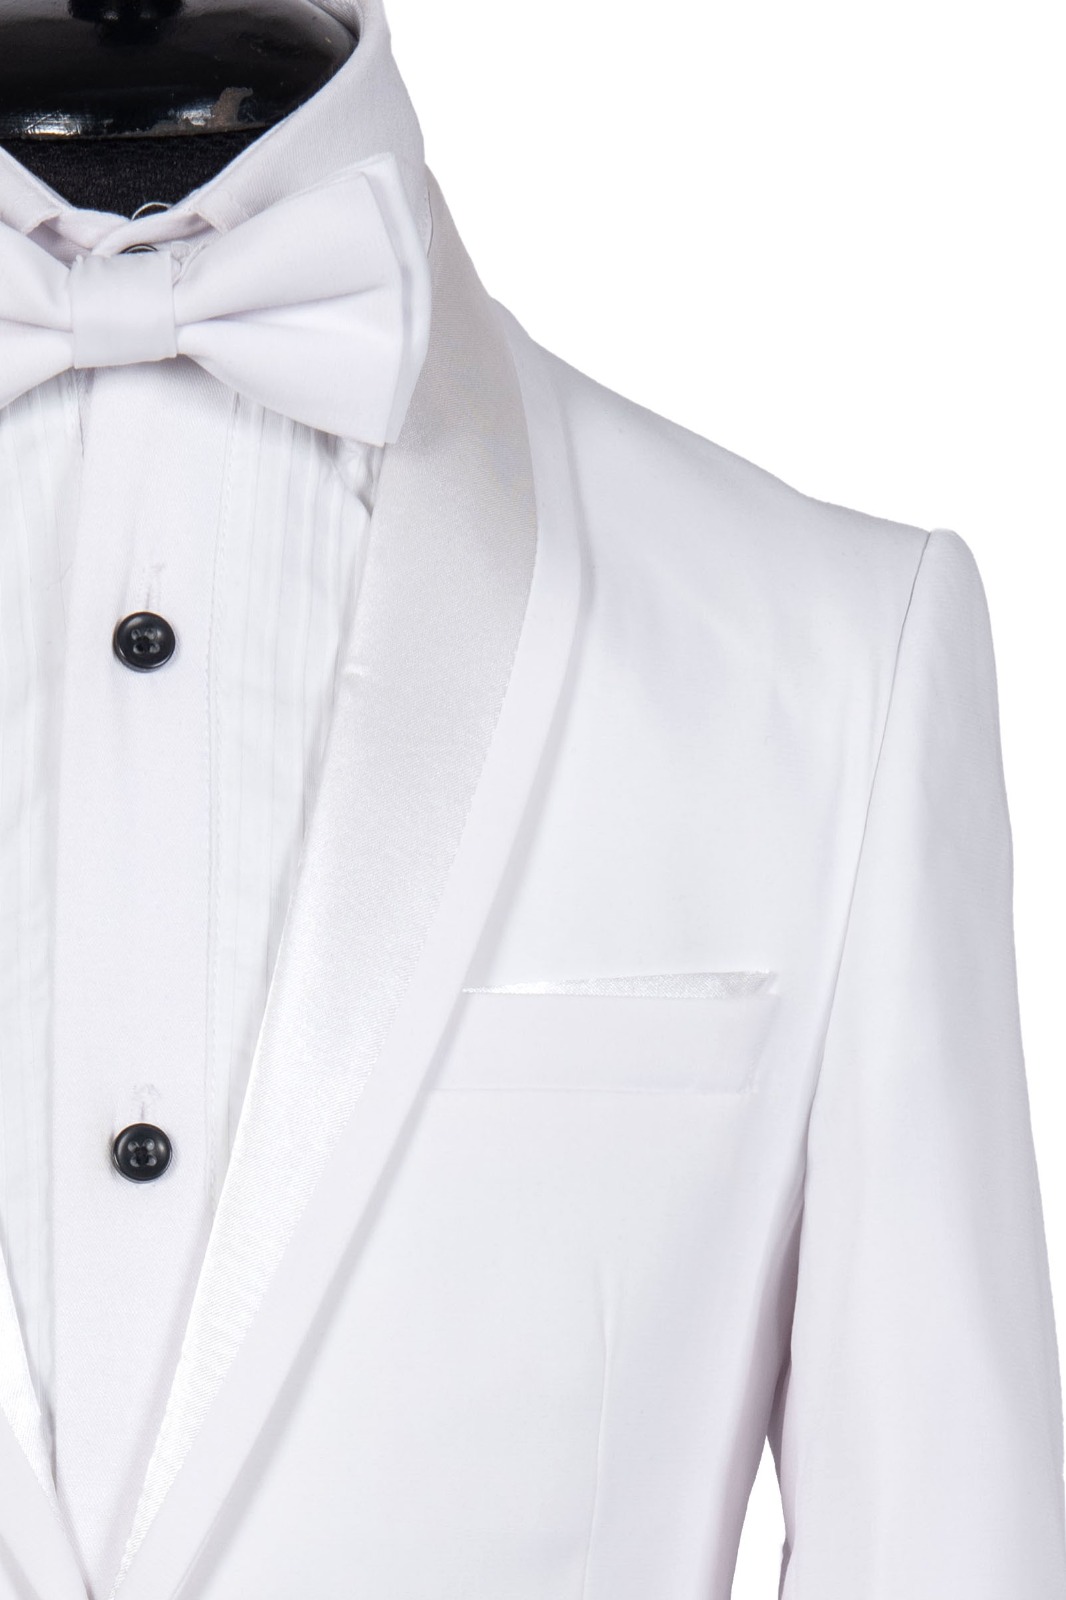 SINGLE BREASTED WHITE TUXEDO WITH CREAM WHITE LAPEL KID SUIT - Stanlion